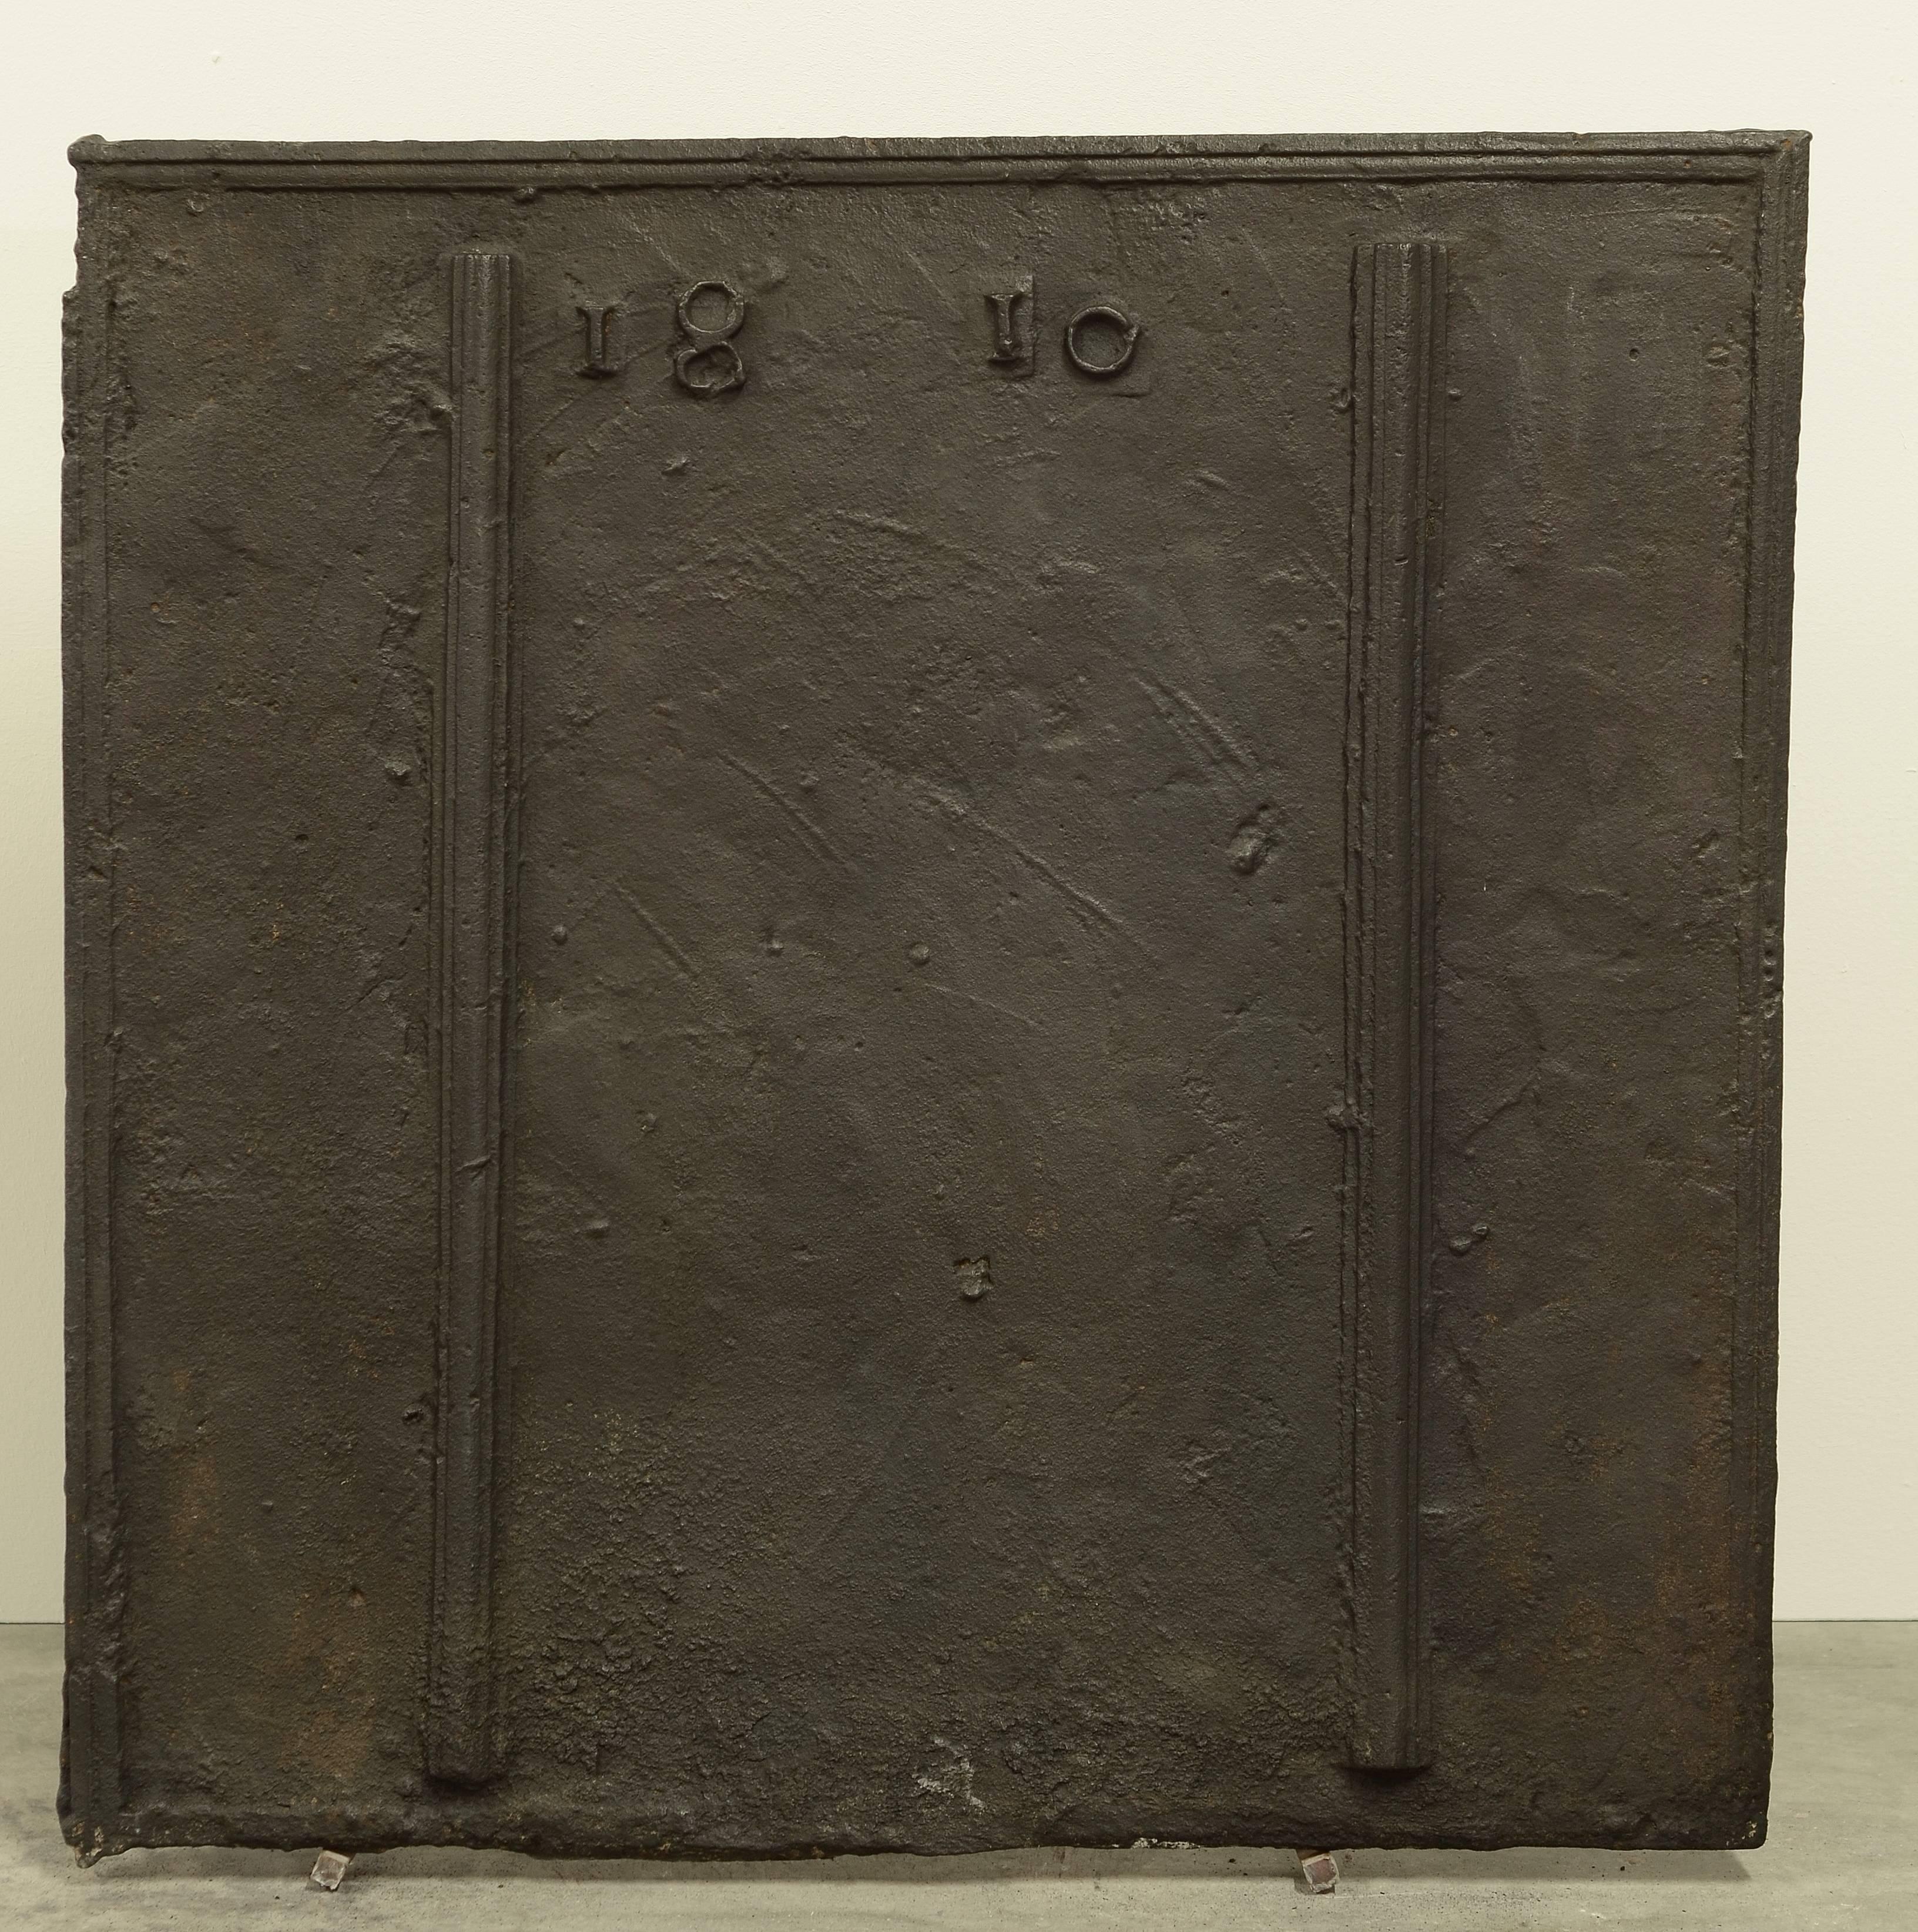 Great antique cast iron fireback.
Dated 1810 between two thick pillars.

Excellent condition, great dimension.
Usable in a fire or as backslash.